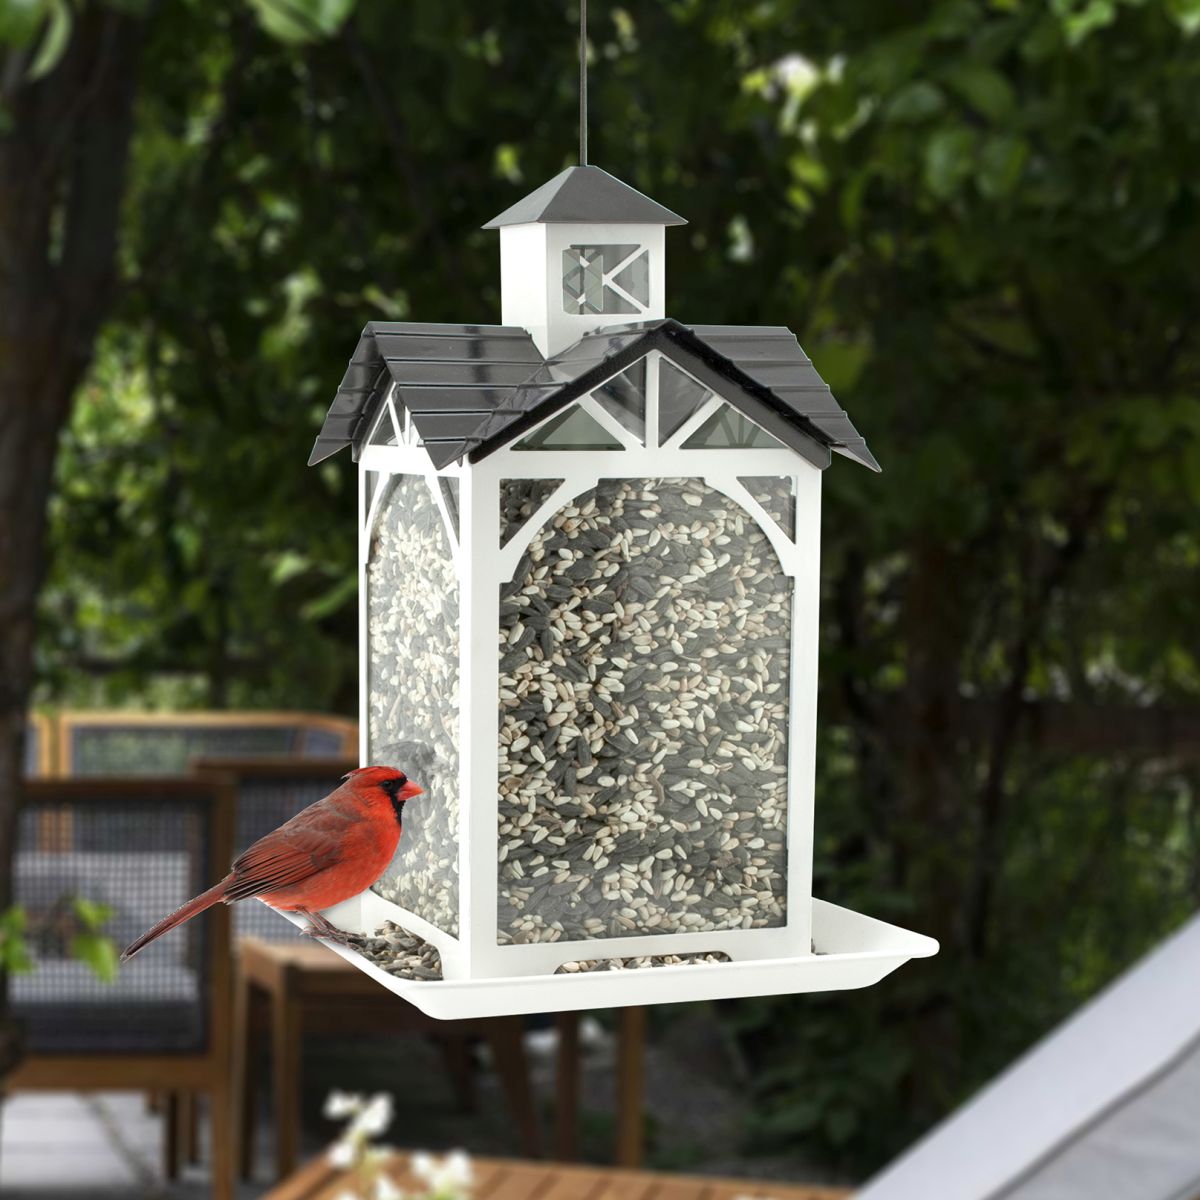 https://www.songbirdgarden.com/store/ProdImages/ProdImages_Extra/27121_WL23808-Modern-Farmhouse-Metal-and-Glass-Stable-Feeder-2.jpg